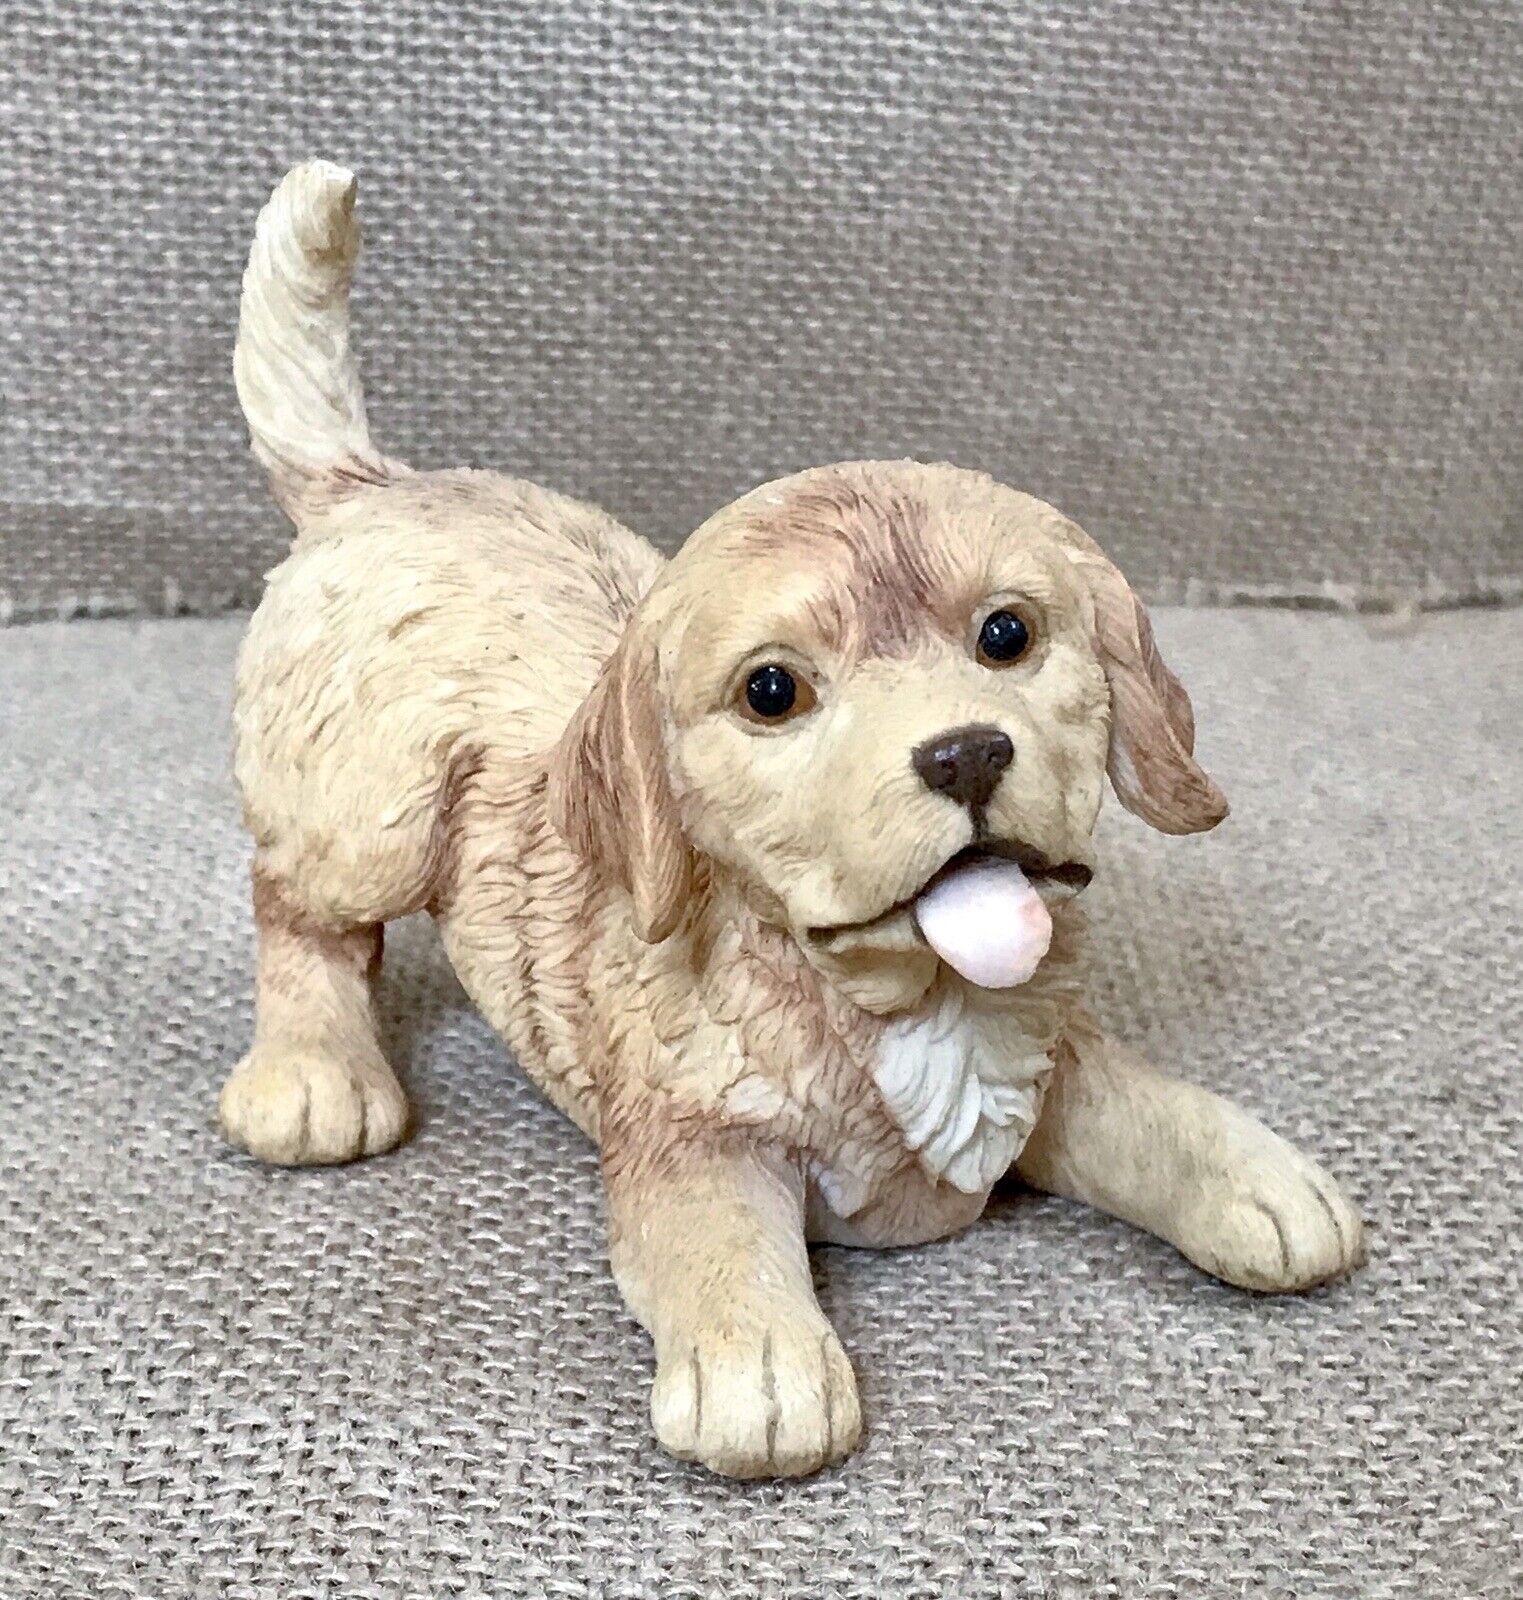 Vintage Sweet Playful Puppy Dog w Tongue Sticking Out Figurine